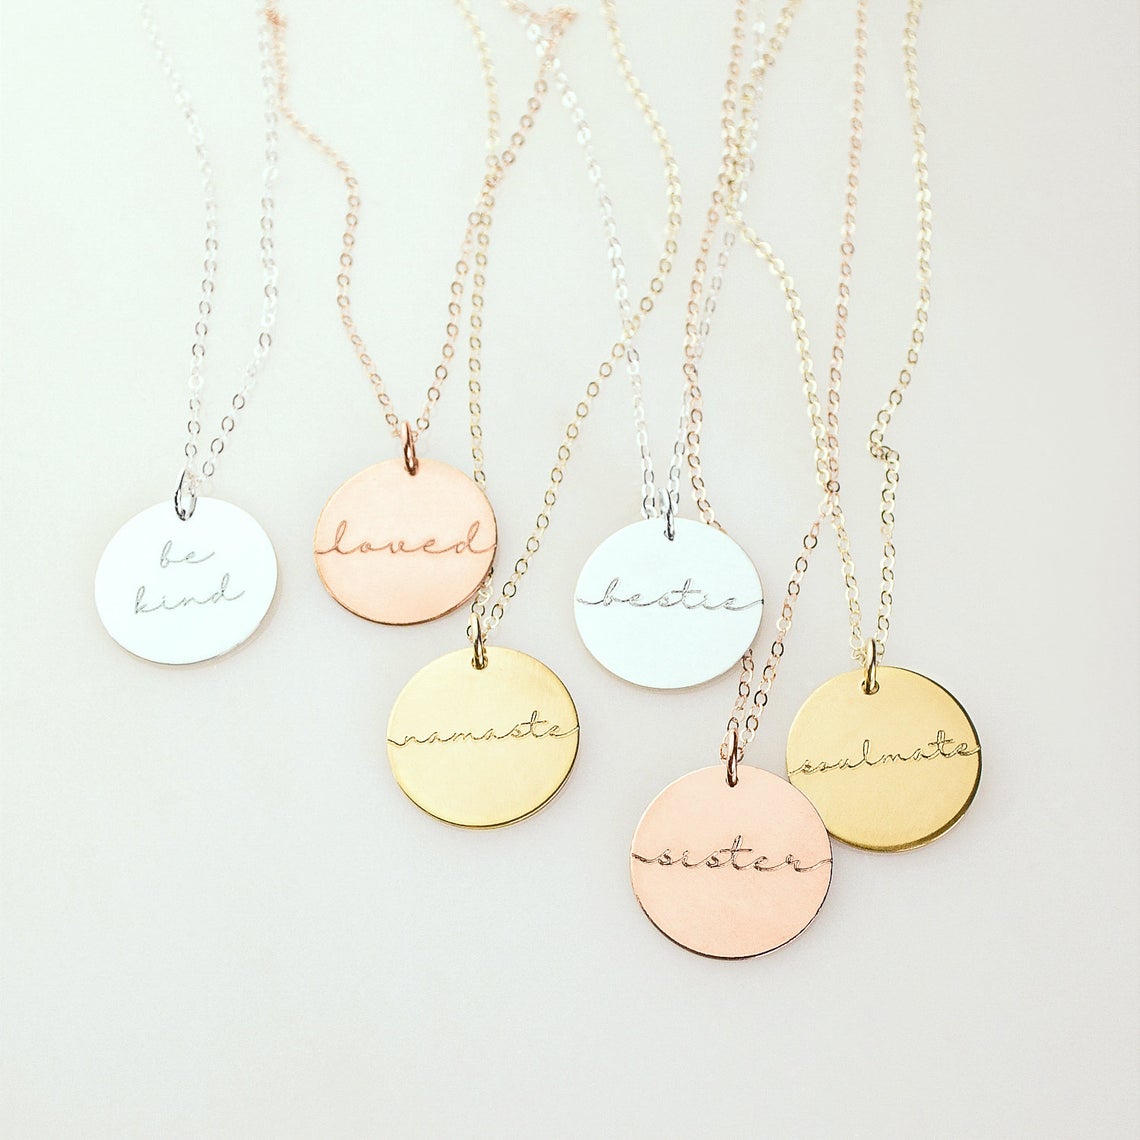 Multiple Link Chain Name Necklace Personalized Gold Silver 